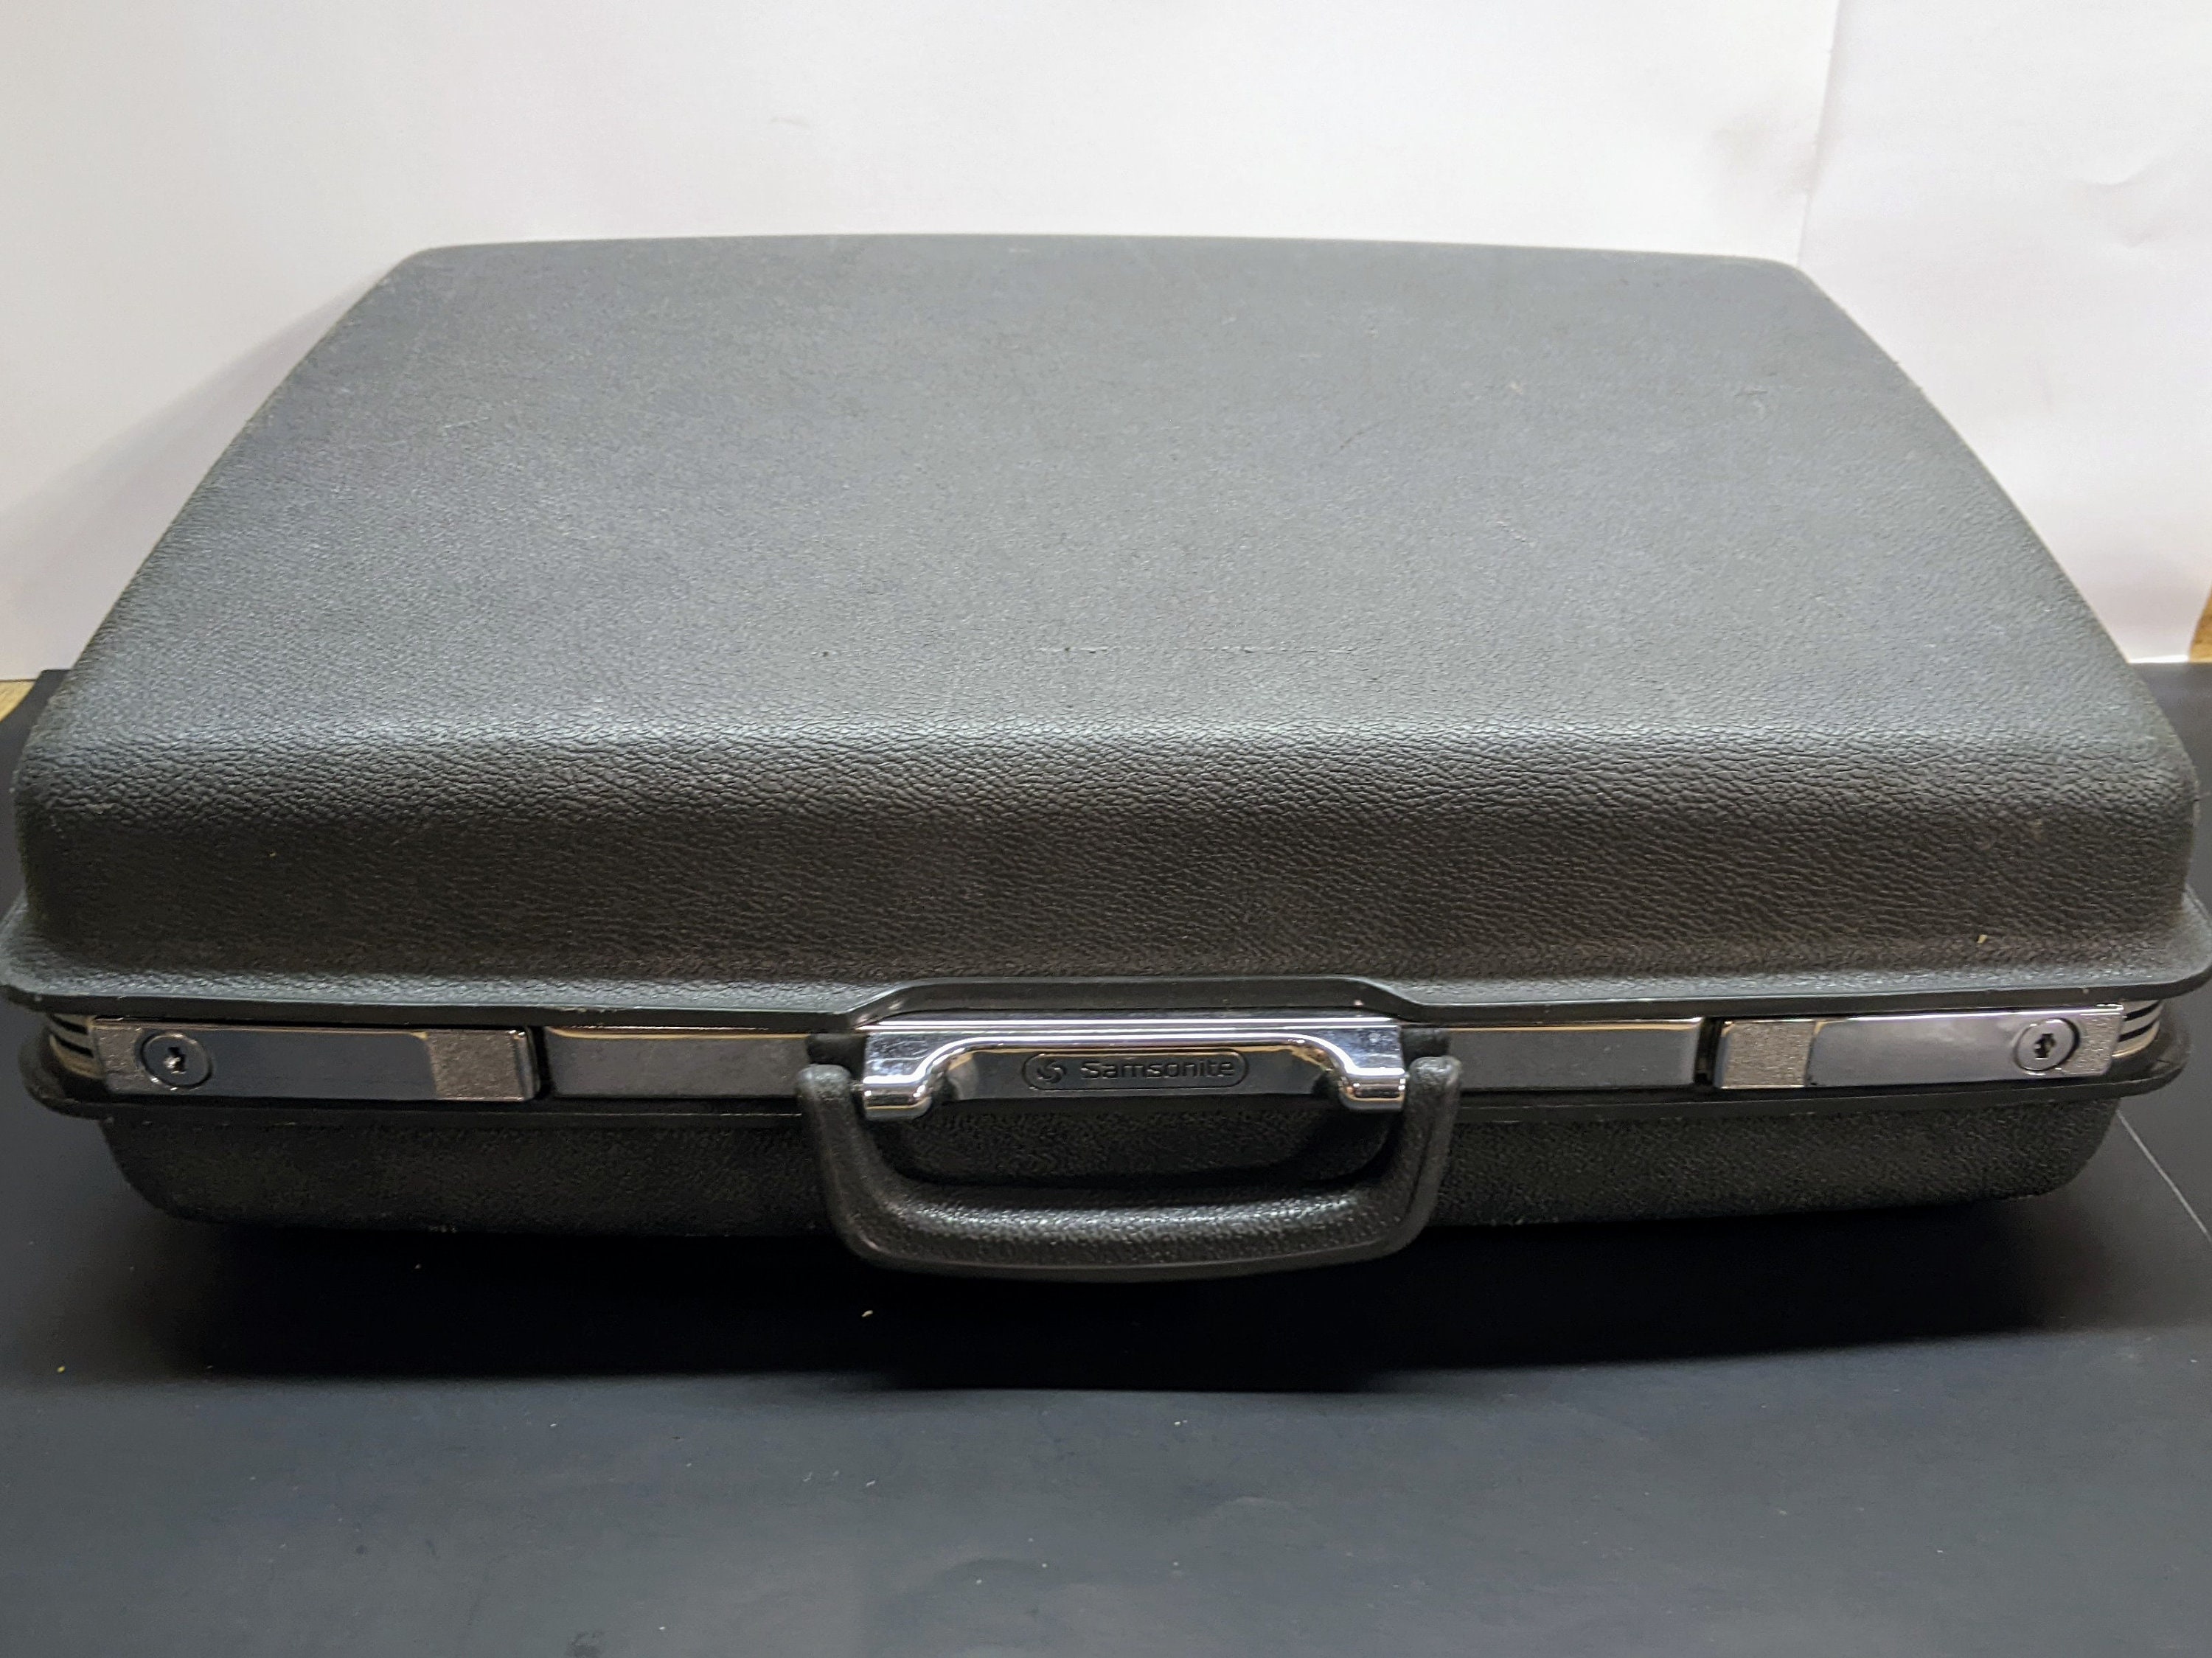 Vintage Charcoal Gray Concord Luggage Hard Shell